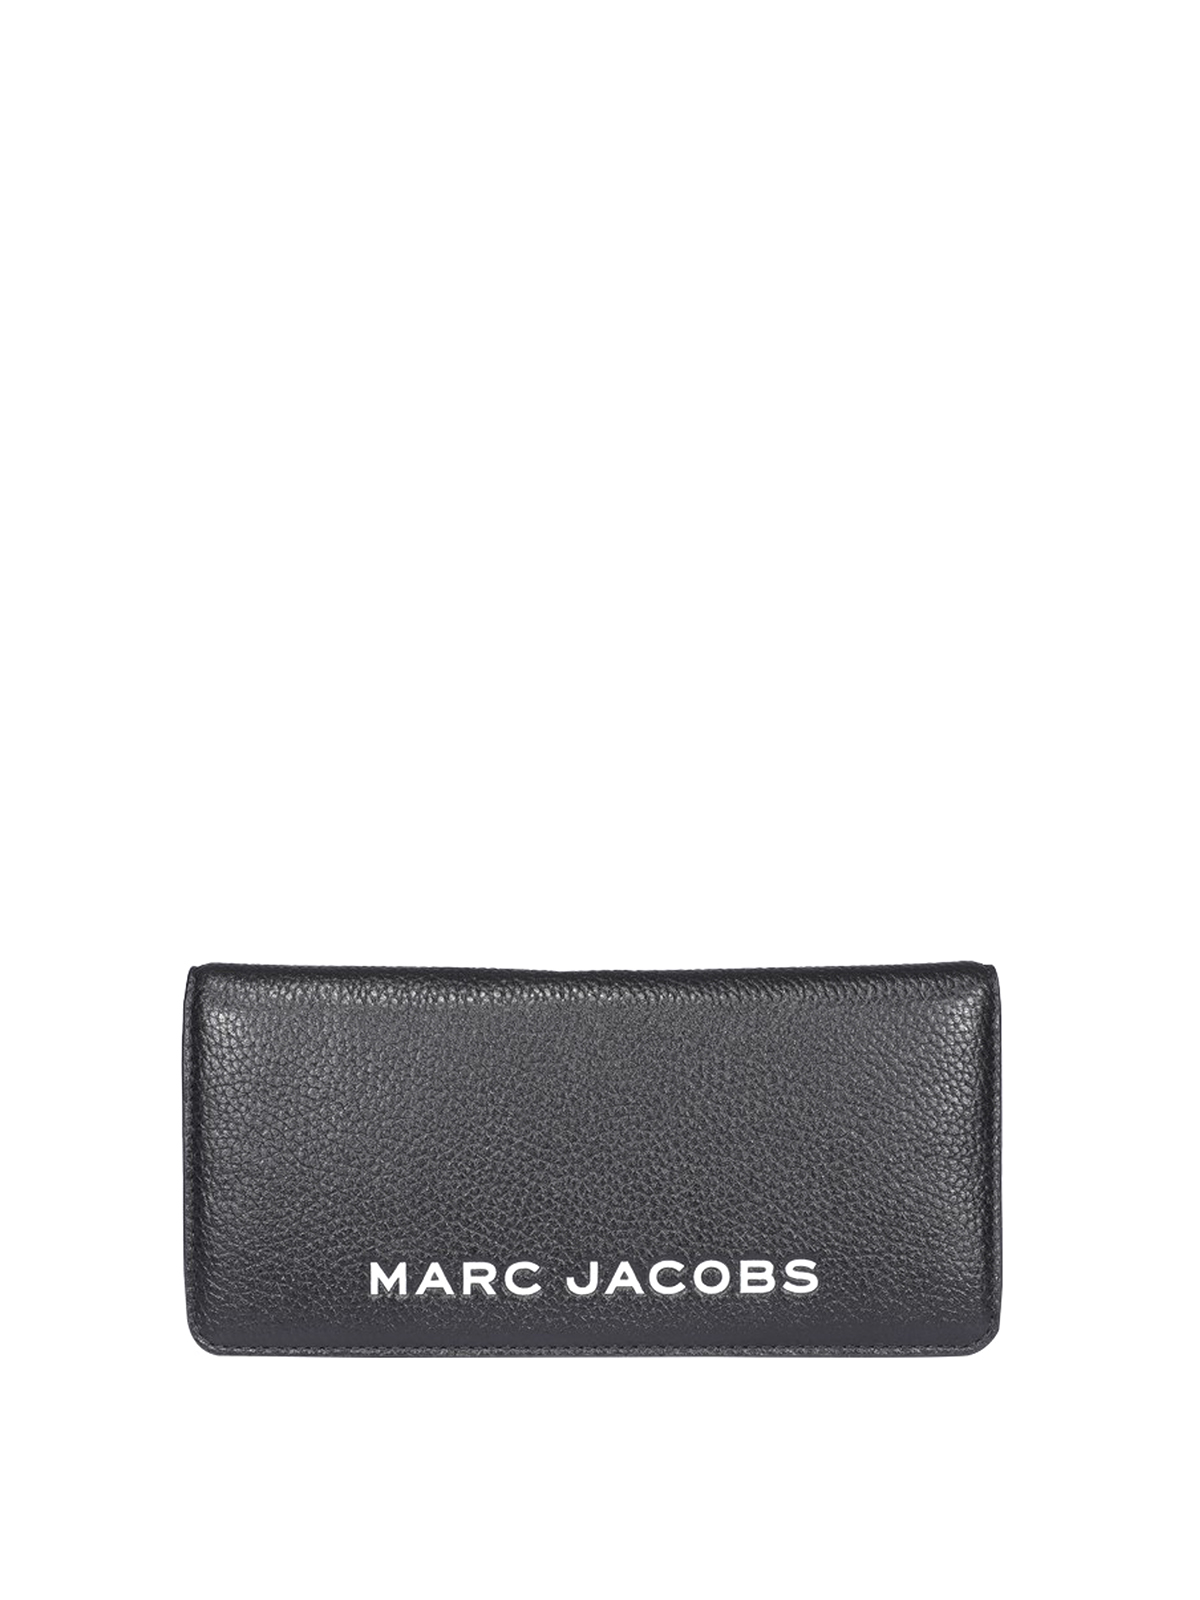 Marc Jacobs The Bold Open Face - Negro